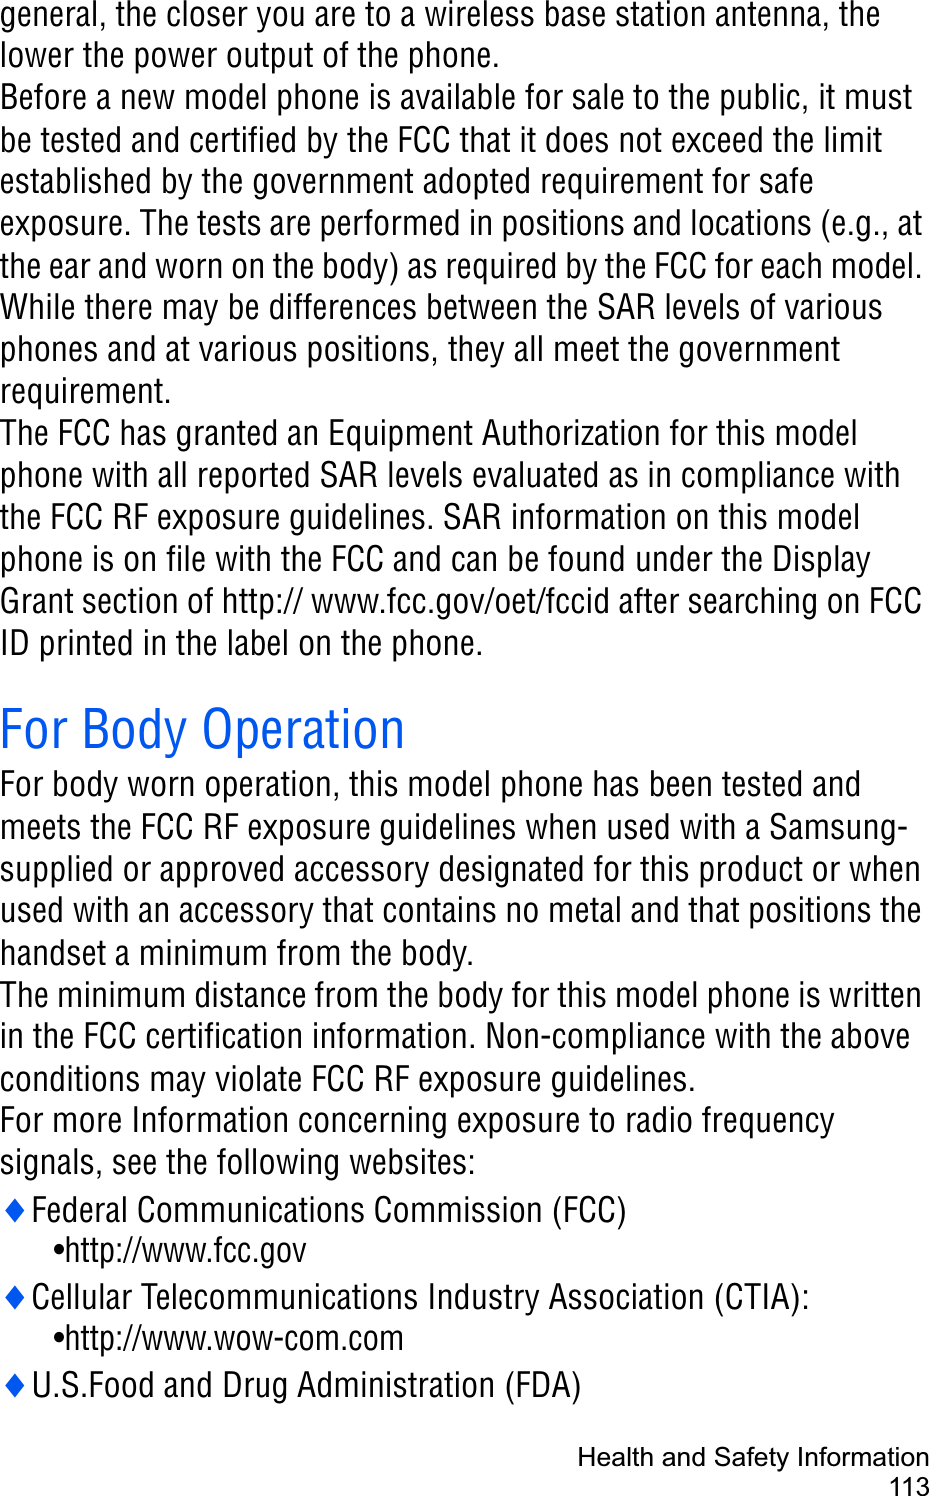 Health and Safety Information113general, the closer you are to a wireless base station antenna, the lower the power output of the phone.Before a new model phone is available for sale to the public, it must be tested and certified by the FCC that it does not exceed the limit established by the government adopted requirement for safe exposure. The tests are performed in positions and locations (e.g., at the ear and worn on the body) as required by the FCC for each model. While there may be differences between the SAR levels of various phones and at various positions, they all meet the government requirement.The FCC has granted an Equipment Authorization for this model phone with all reported SAR levels evaluated as in compliance with the FCC RF exposure guidelines. SAR information on this model phone is on file with the FCC and can be found under the Display Grant section of http:// www.fcc.gov/oet/fccid after searching on FCC ID printed in the label on the phone.For Body OperationFor body worn operation, this model phone has been tested and meets the FCC RF exposure guidelines when used with a Samsung-supplied or approved accessory designated for this product or when used with an accessory that contains no metal and that positions the handset a minimum from the body.The minimum distance from the body for this model phone is written in the FCC certification information. Non-compliance with the above conditions may violate FCC RF exposure guidelines.For more Information concerning exposure to radio frequency signals, see the following websites:iFederal Communications Commission (FCC)                      •http://www.fcc.goviCellular Telecommunications Industry Association (CTIA): •http://www.wow-com.comiU.S.Food and Drug Administration (FDA)                           